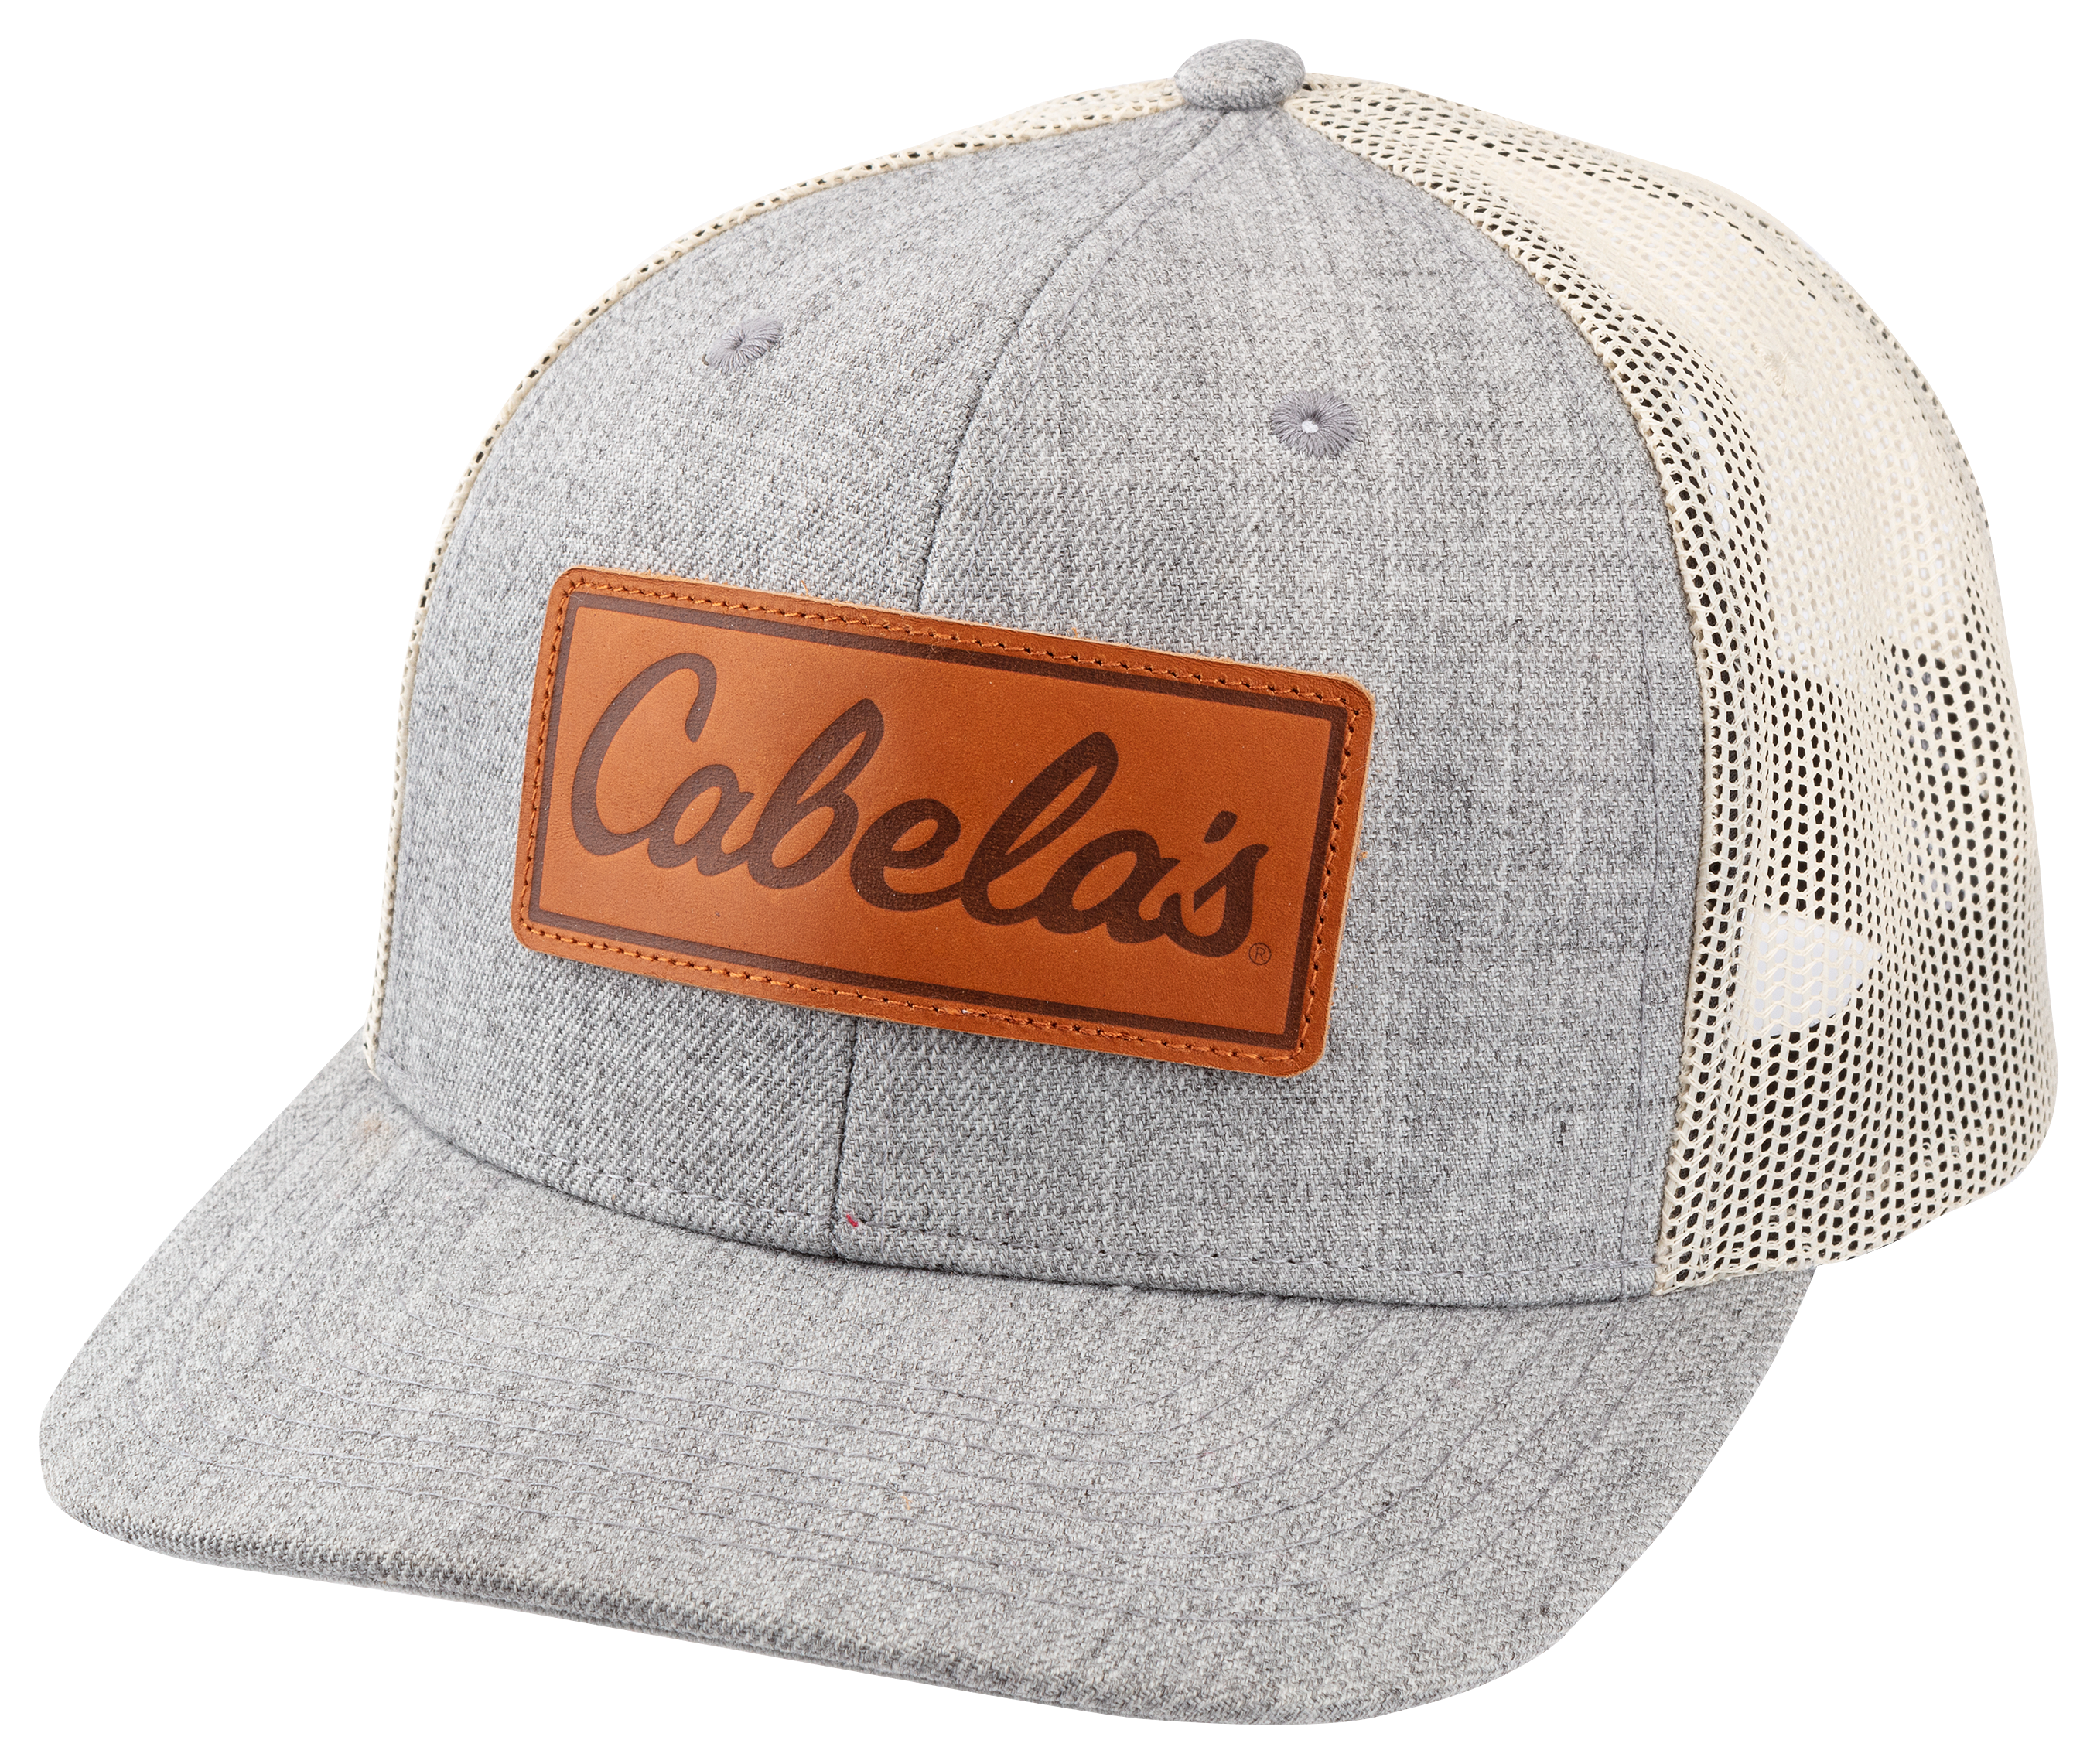 Cabela's Local Crowns Leather Patch Cap - Gray